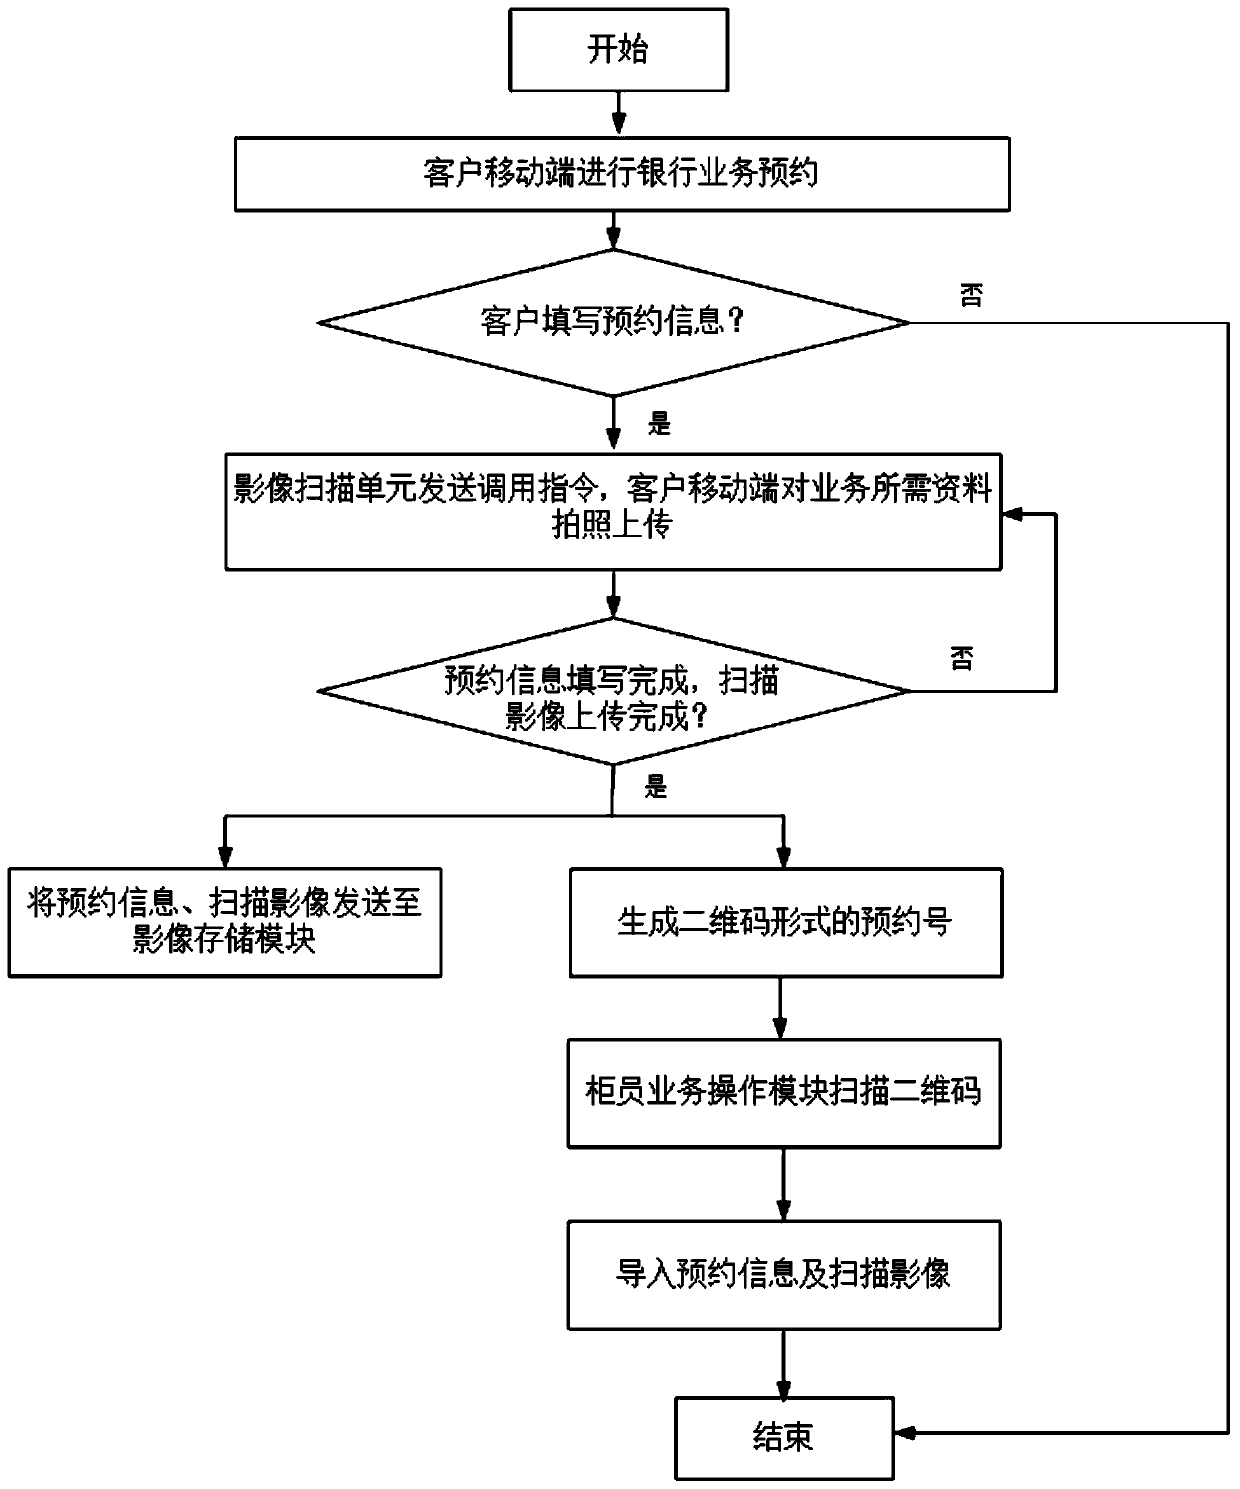 Bank outlet online and offline integrated service system and service interaction method